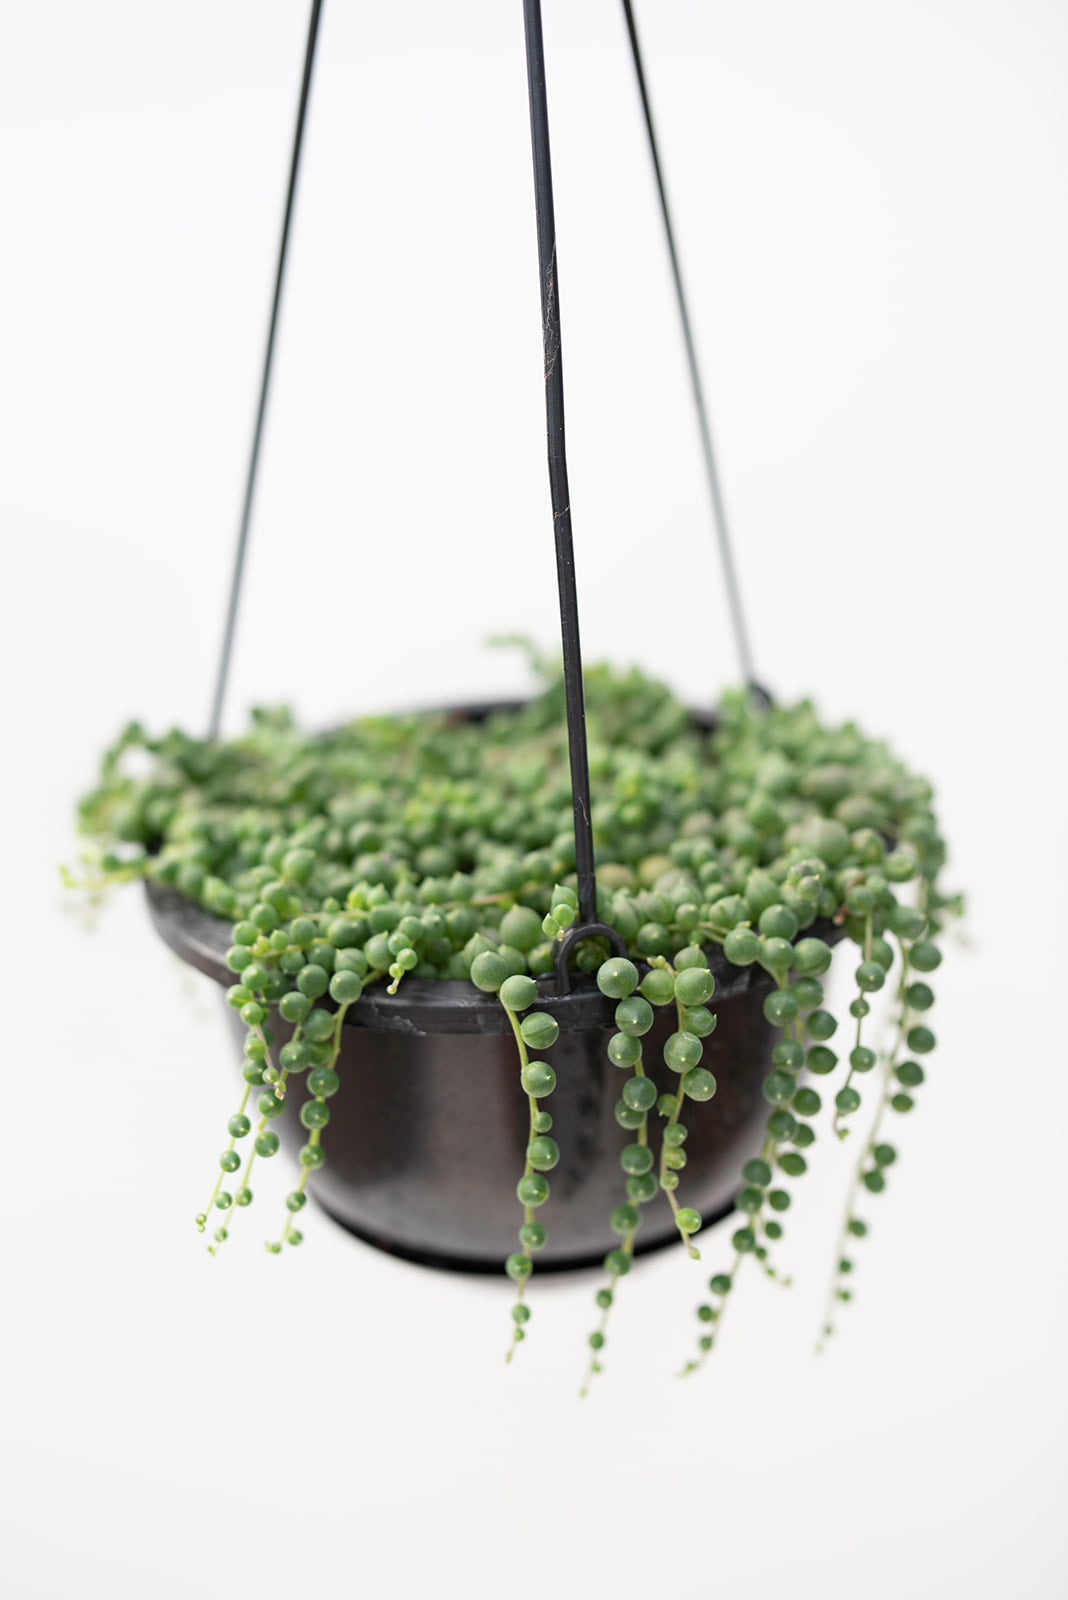 6” String of Pearls